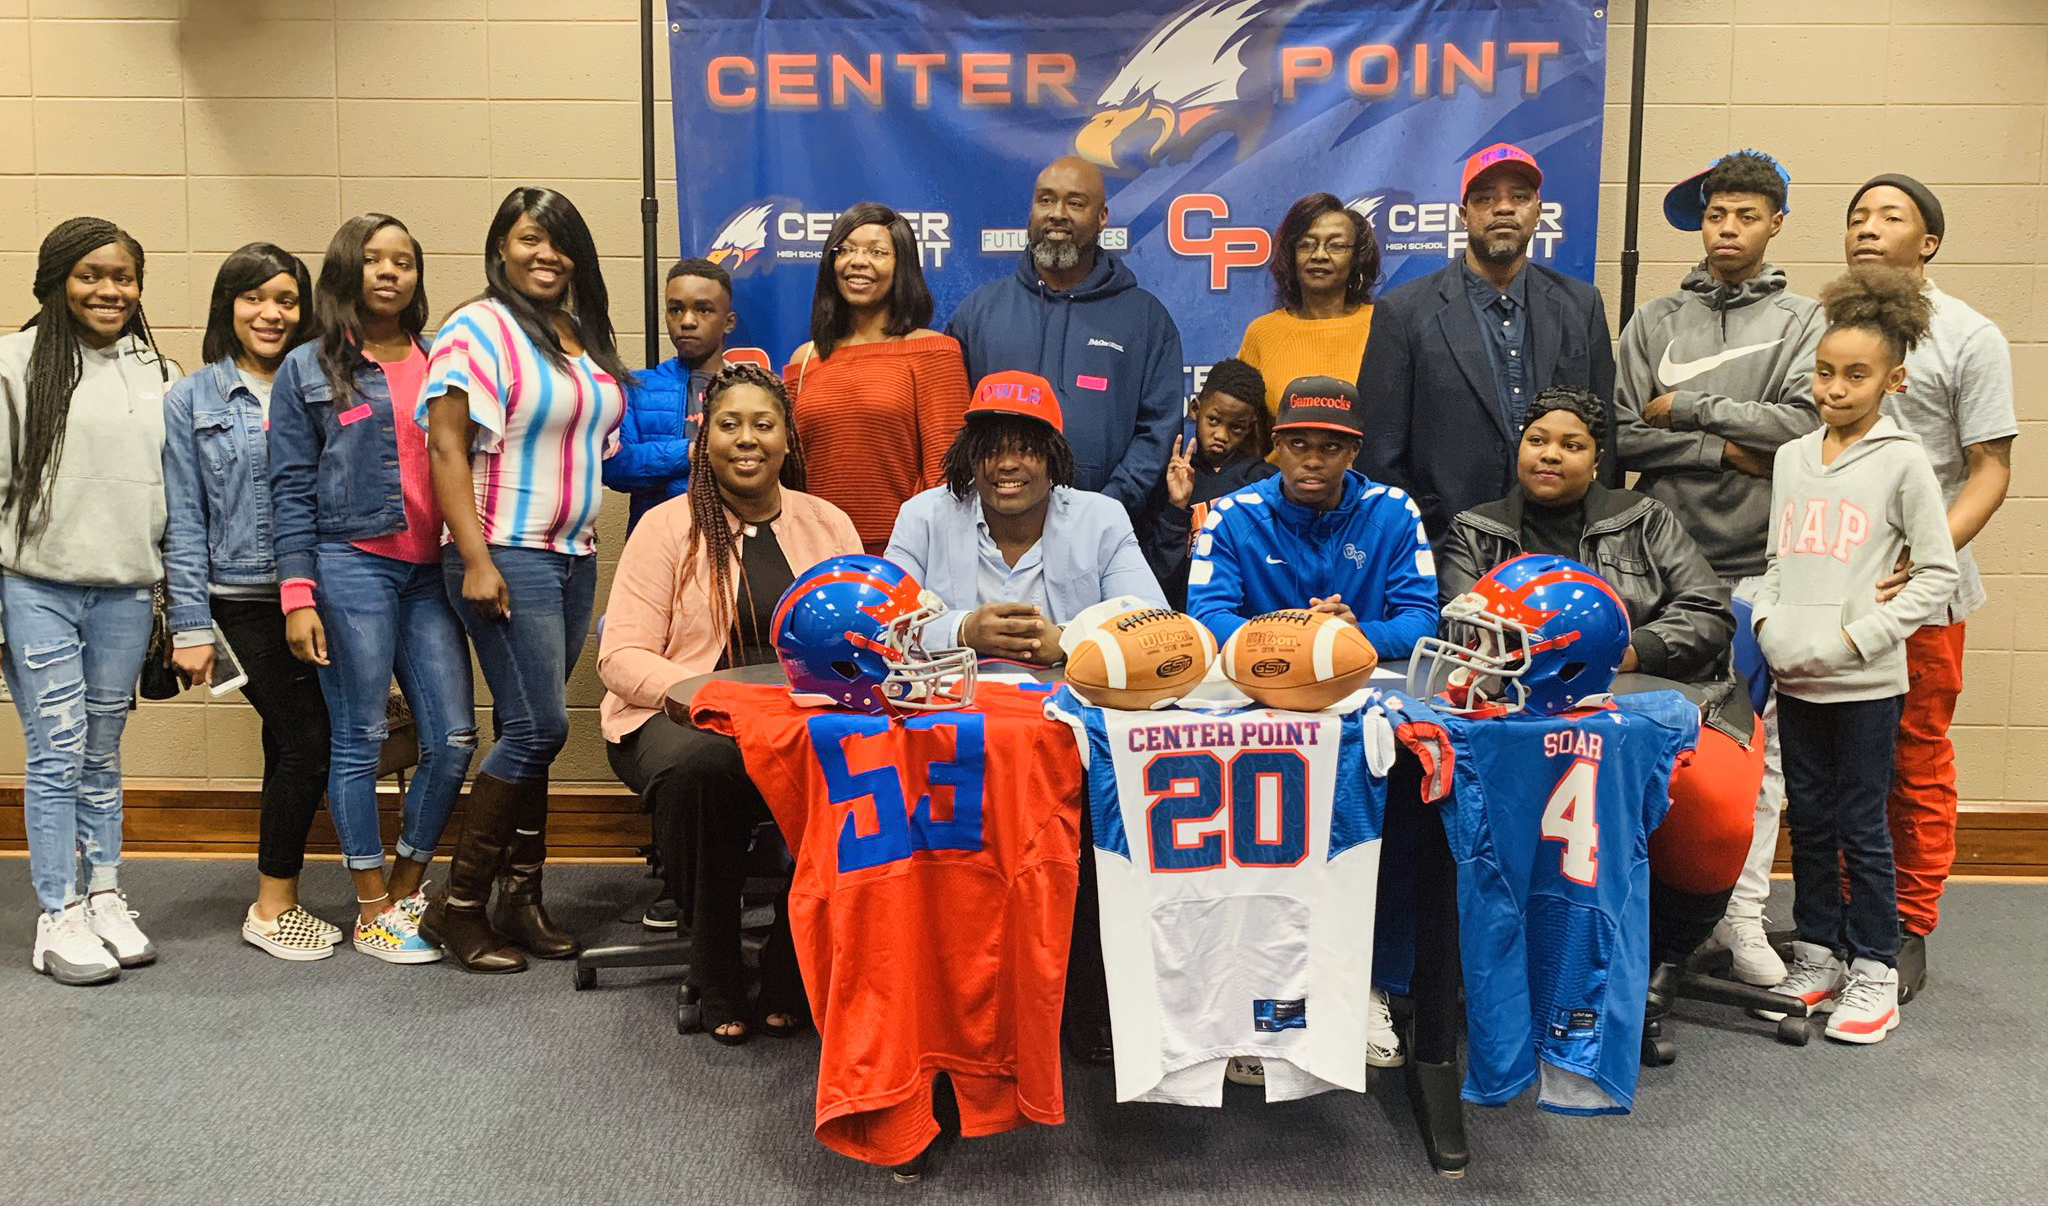 National Signing Day: 2 from Center Point sign intention to play college football